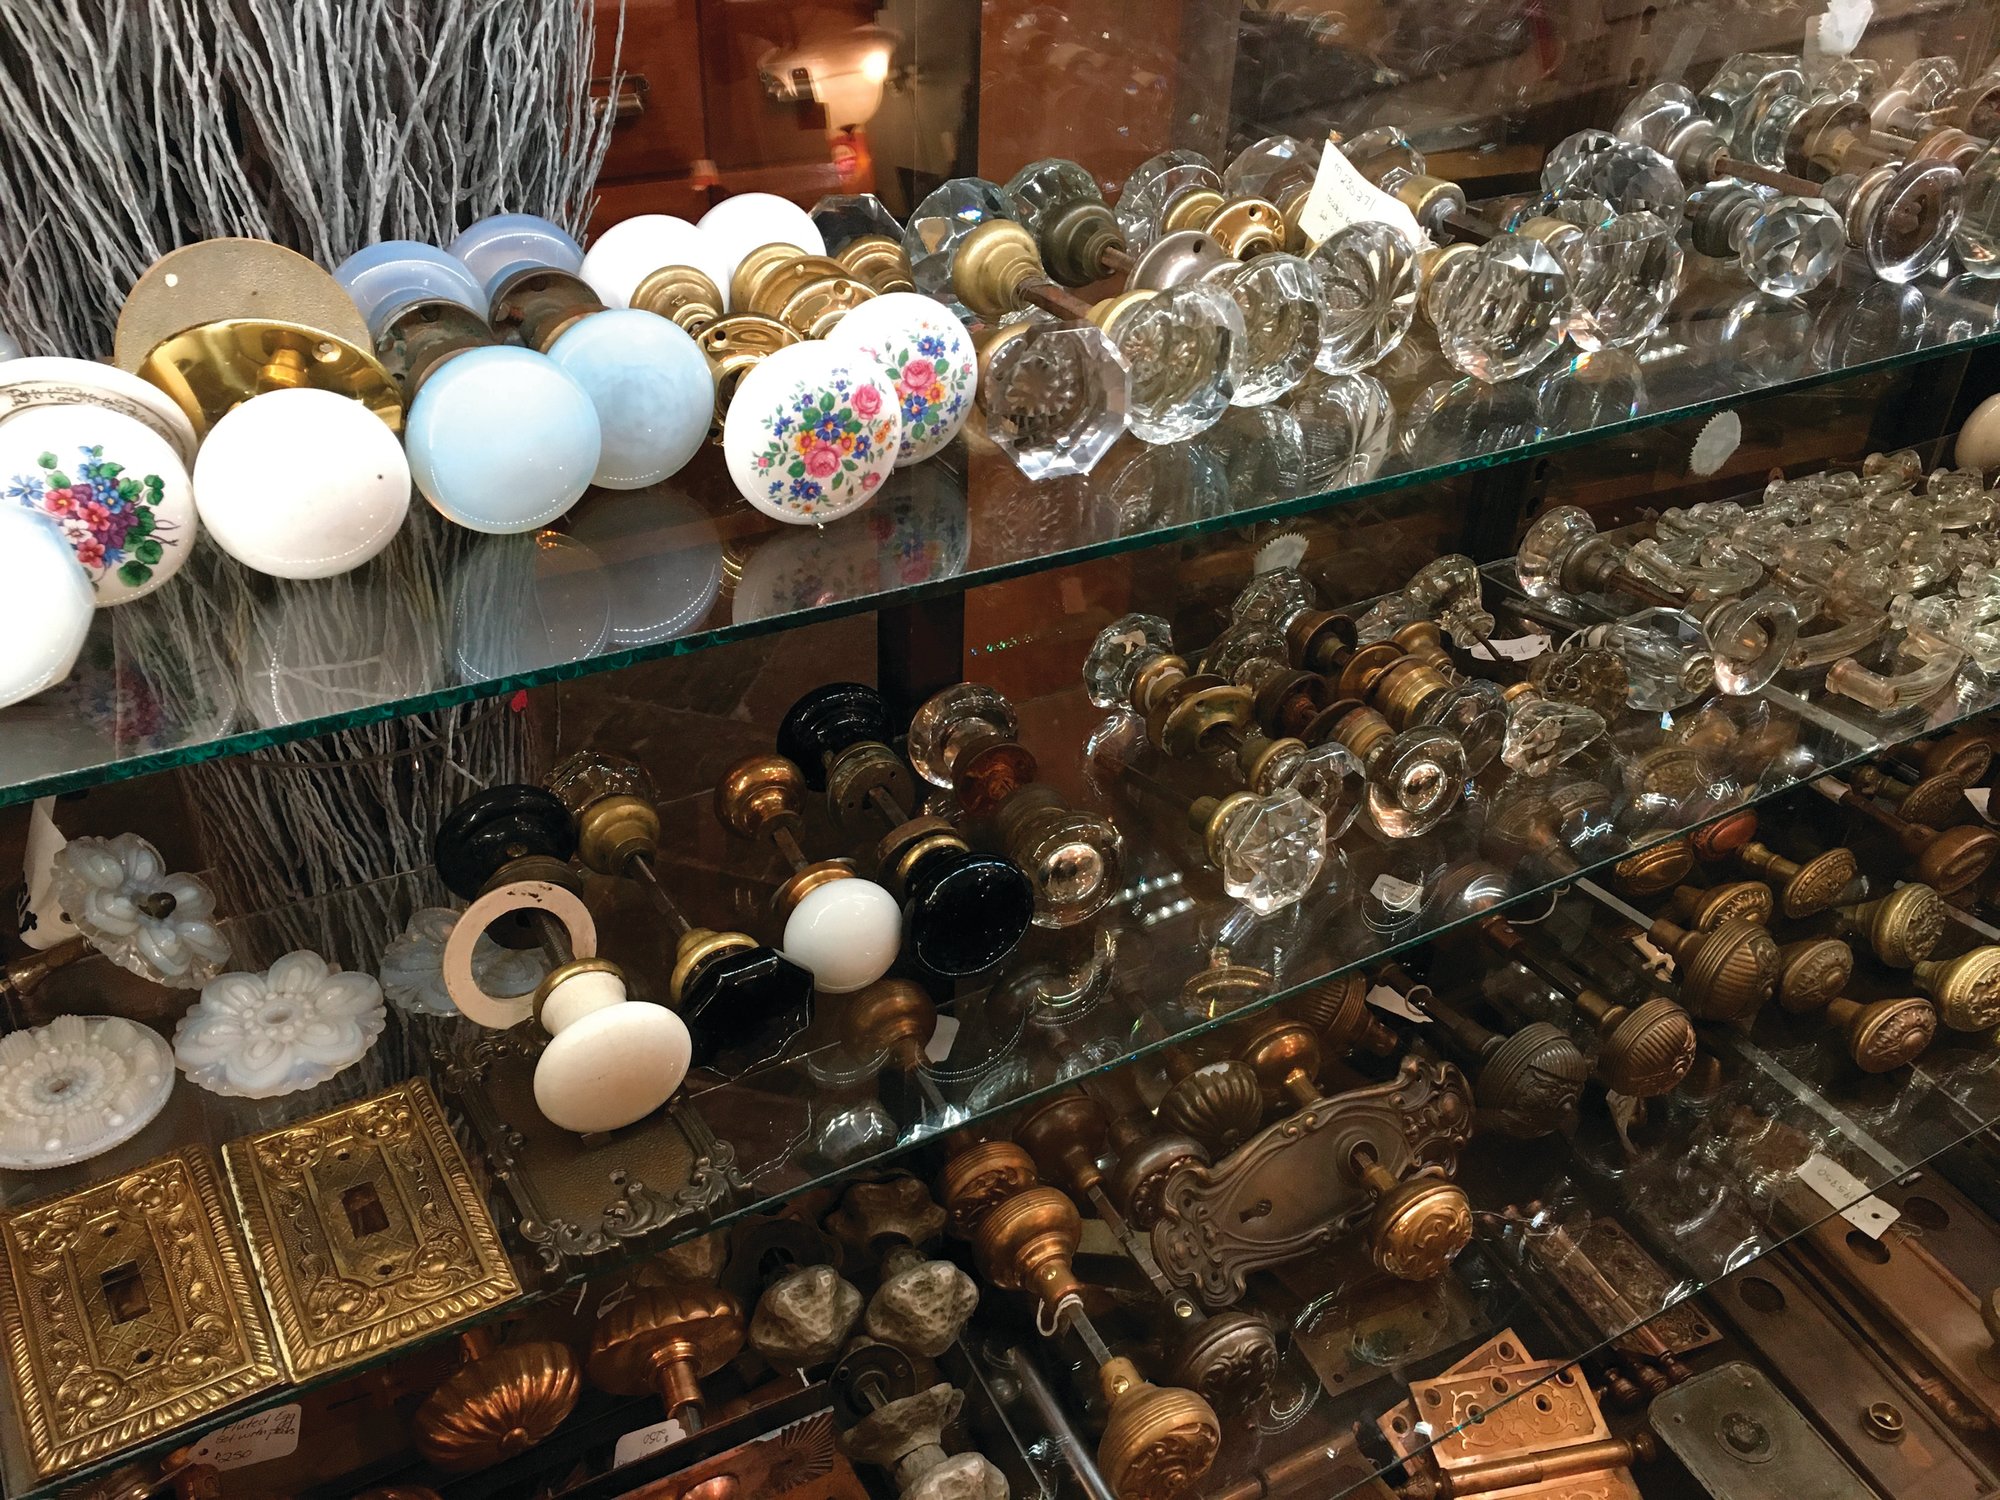 PHOTOS BY KATHERINE ROTH VIA AP Seen is a selection of vintage doorknobs and other items available for sale at Olde Good Things salvage store in New York.